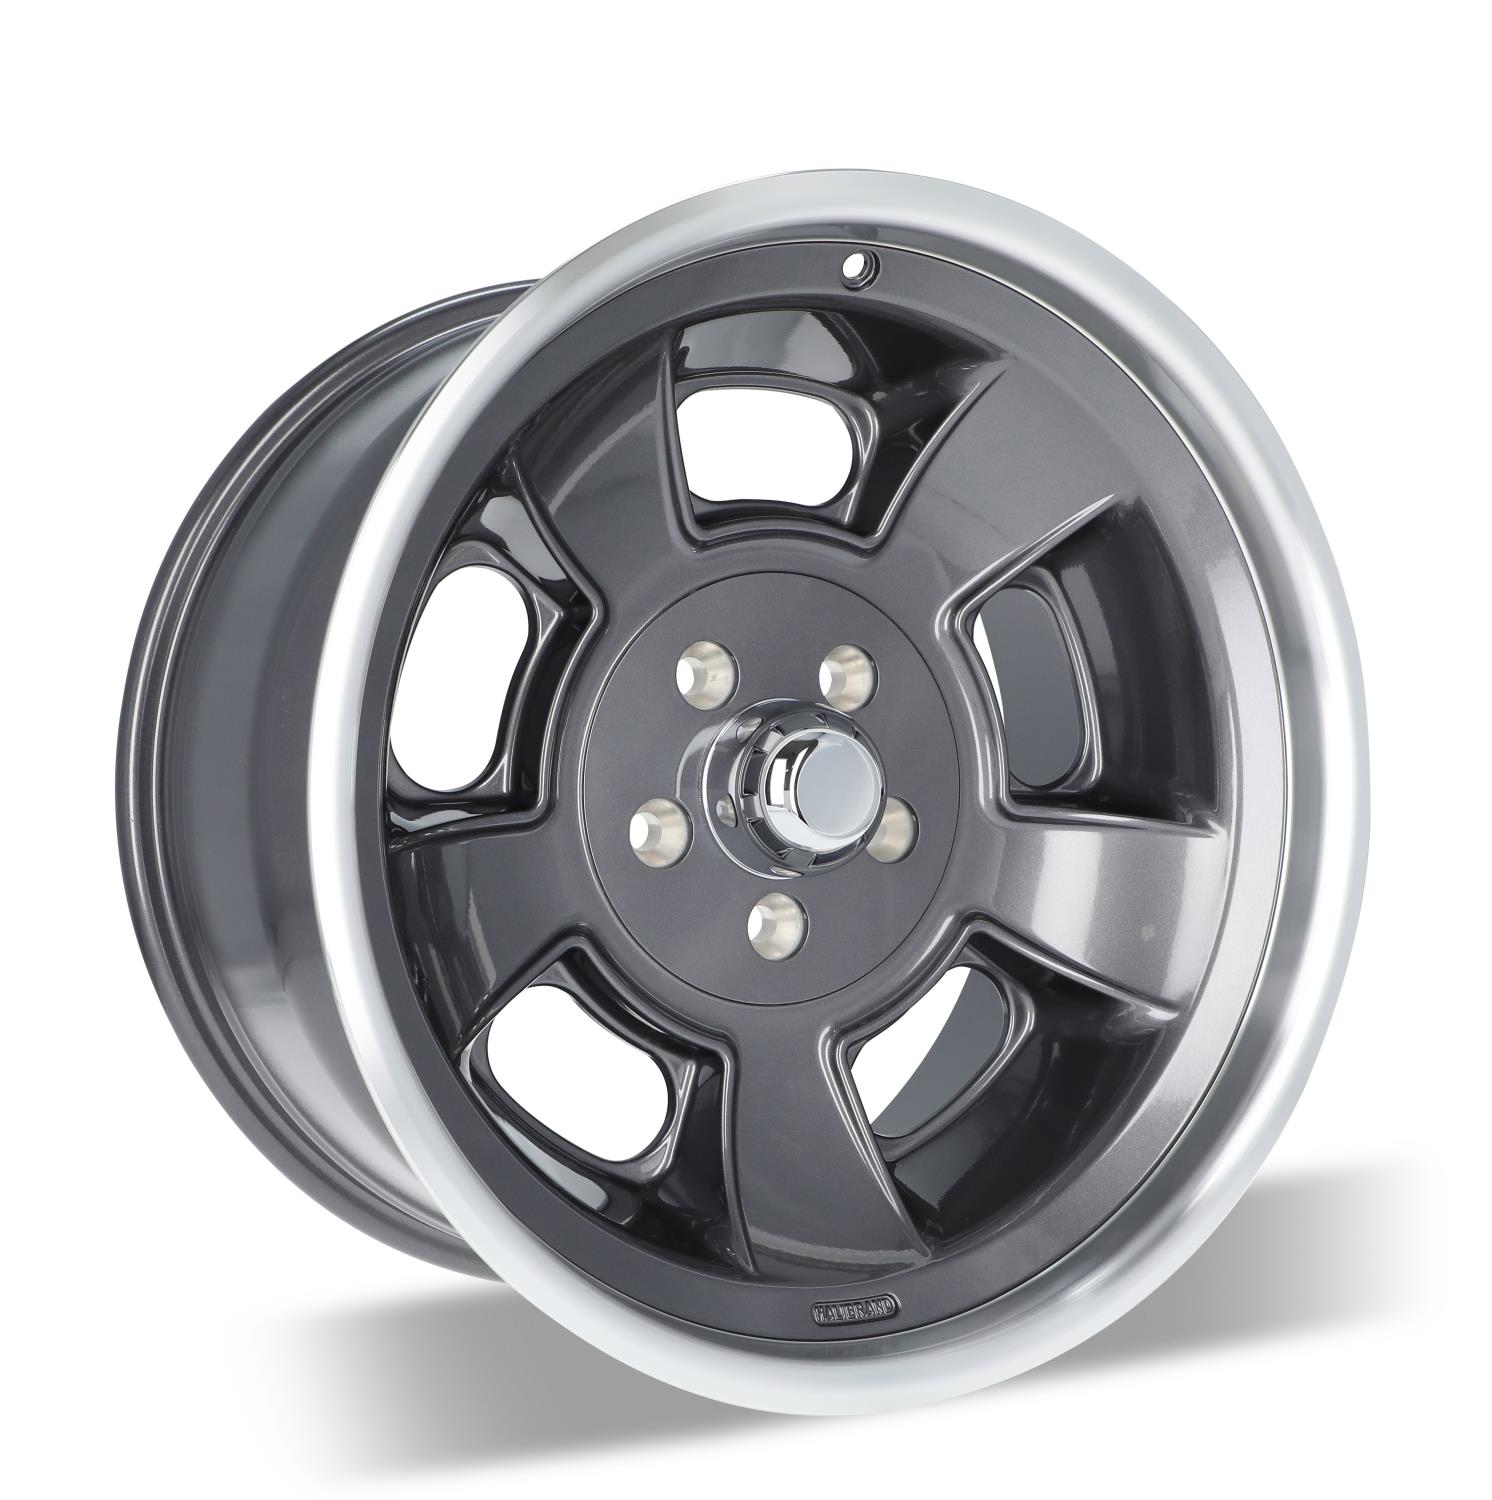 Sprint Rear Wheel, Size: 19x10", Bolt Pattern: 5x5", Backspace: 5.5" [Anthracite with Machined Lip - Gloss Clearcoat]